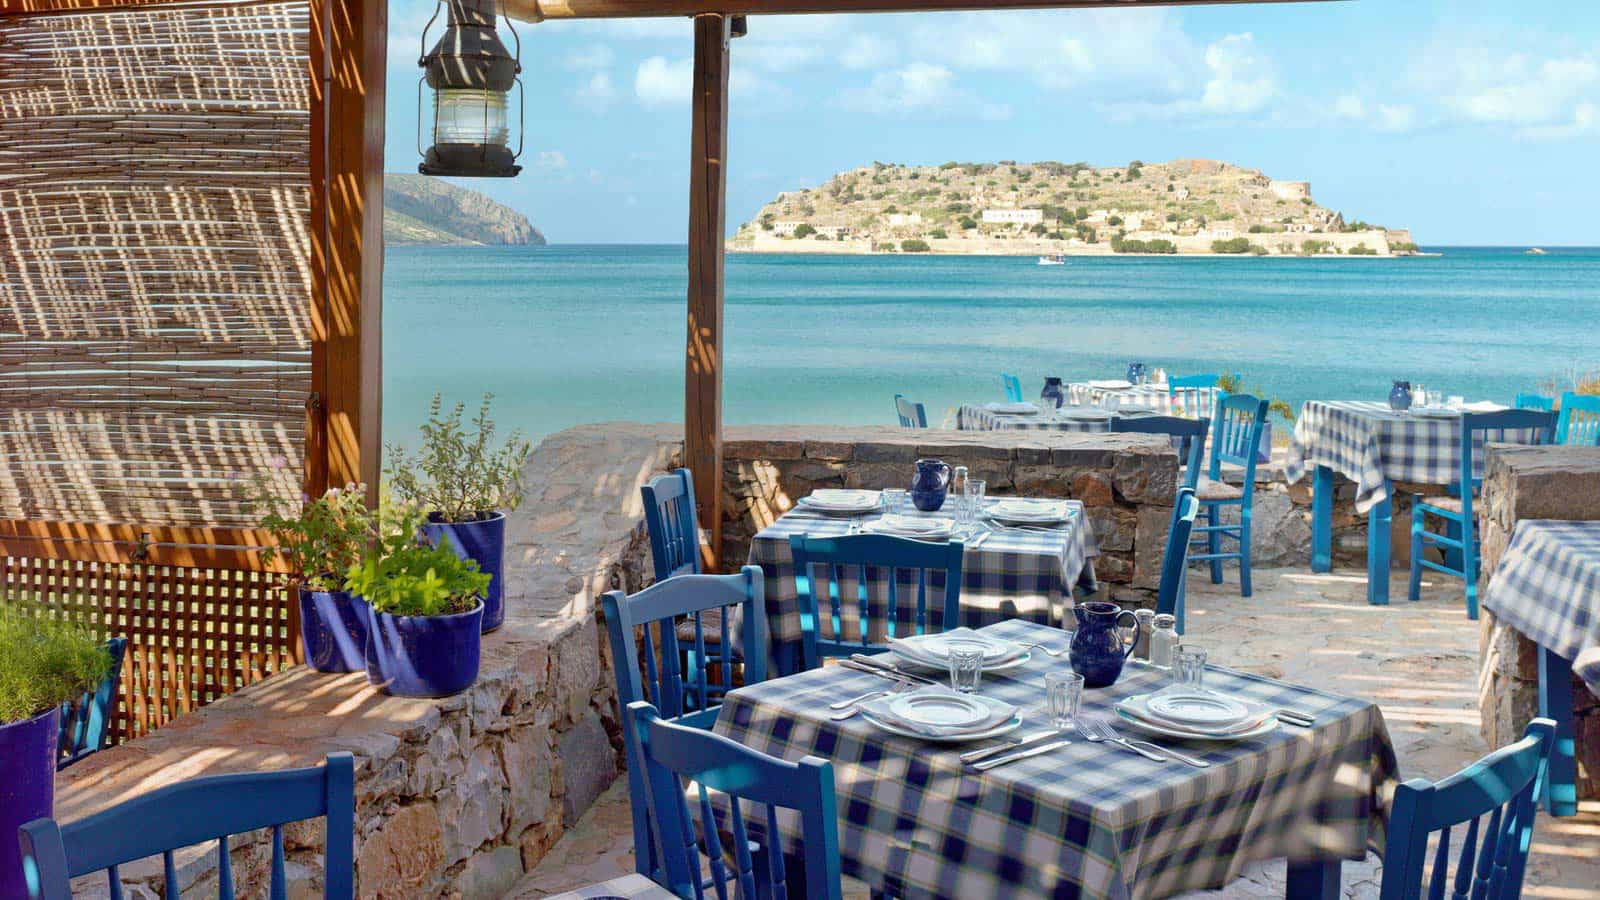 Dine and overlook the Mediterranean at Blue Palace, A Luxury Collection Resort, Crete.